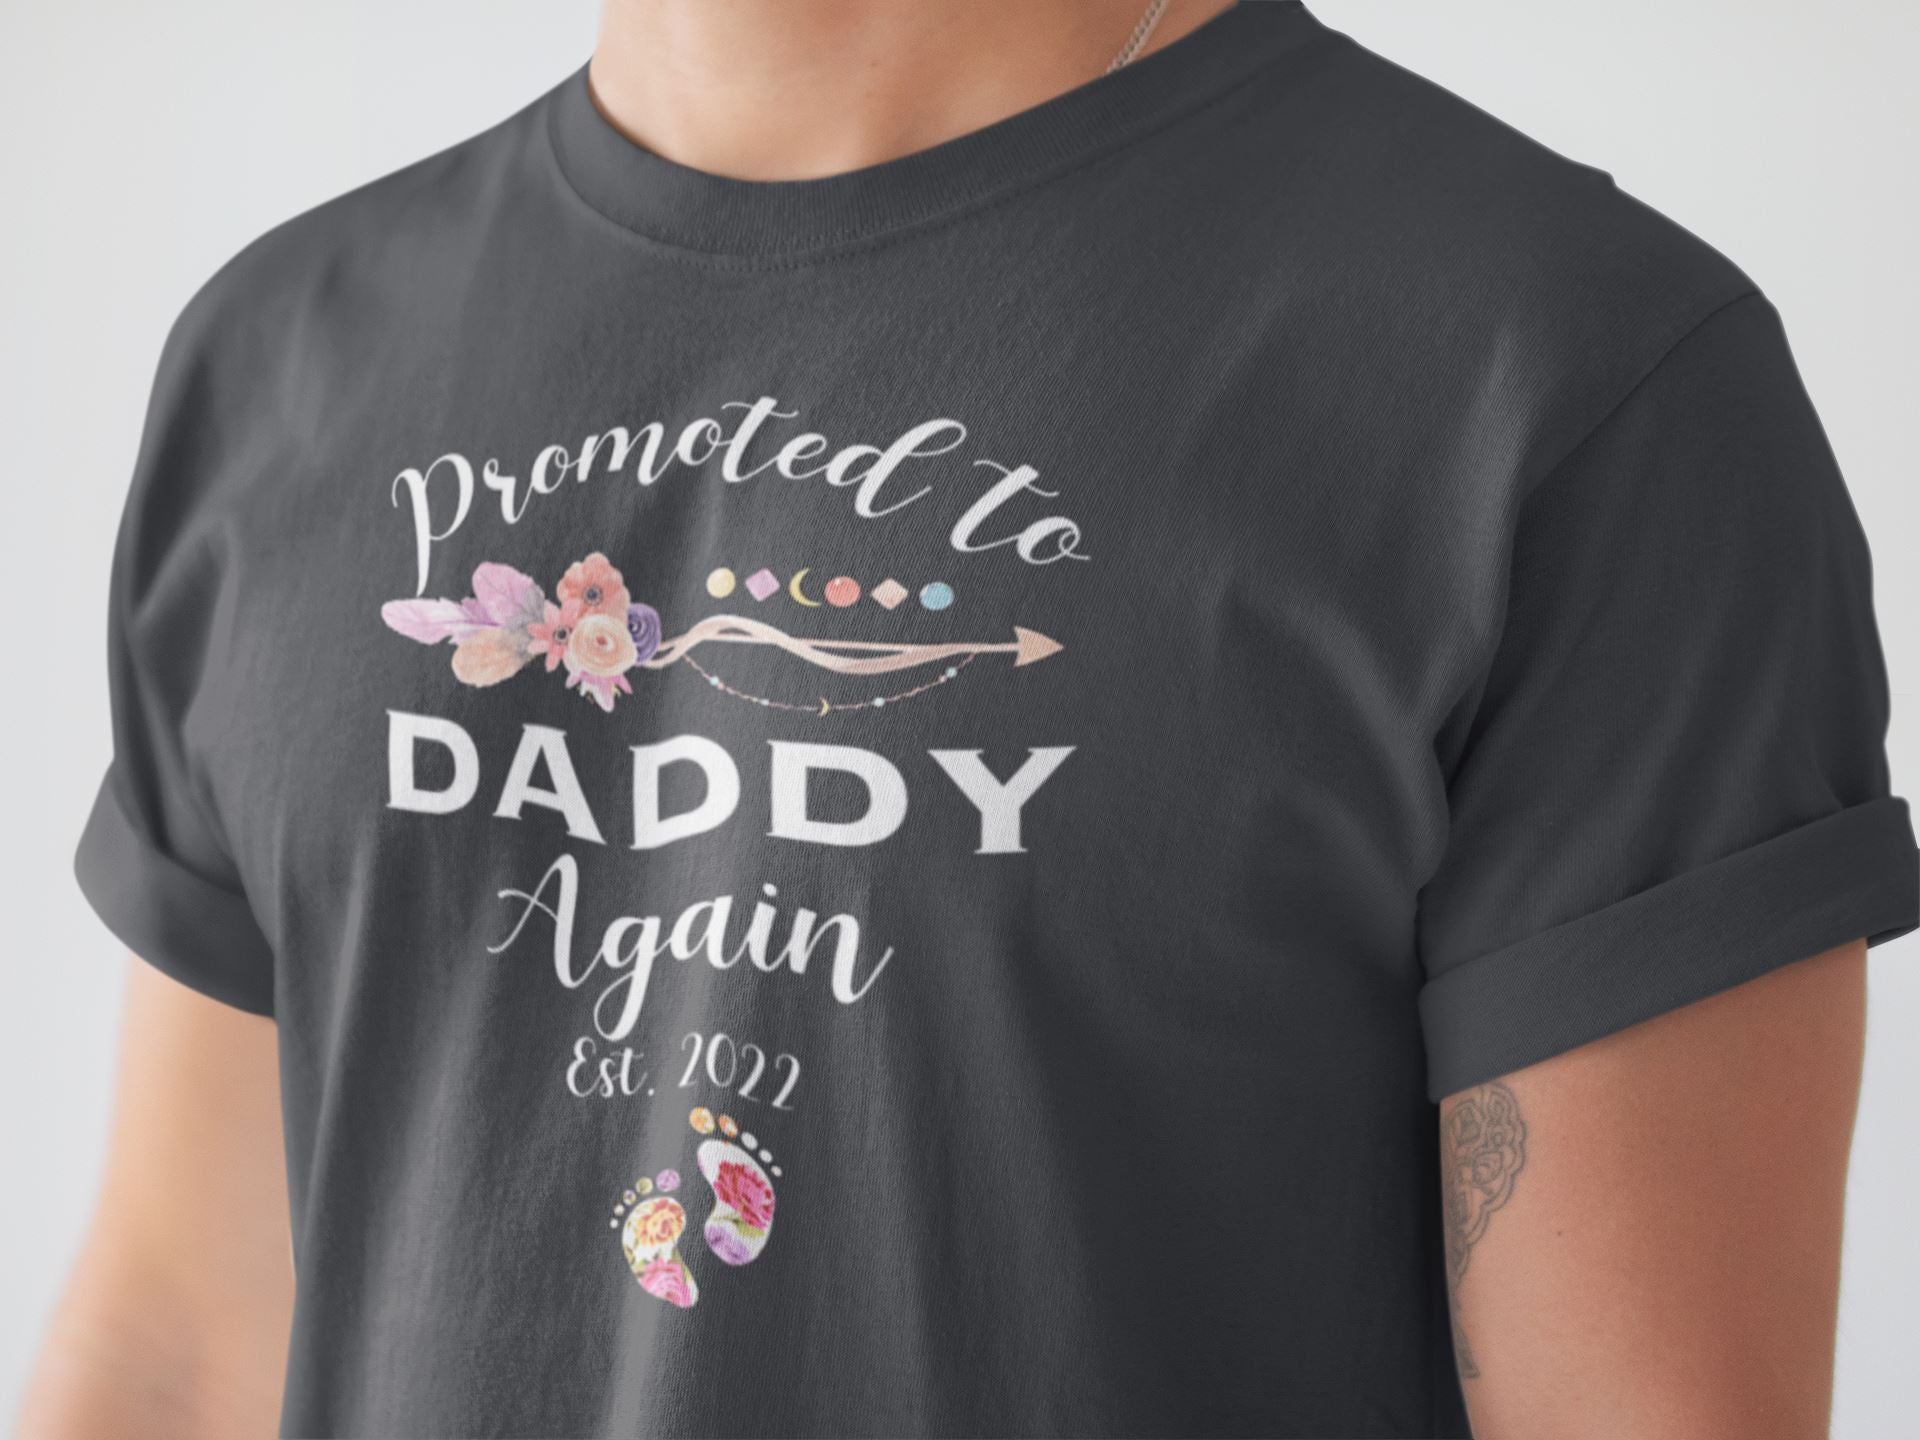 Promoted to Daddy Again Est. 2022 Special Black T Shirt for Men freeshipping - Catch My Drift India